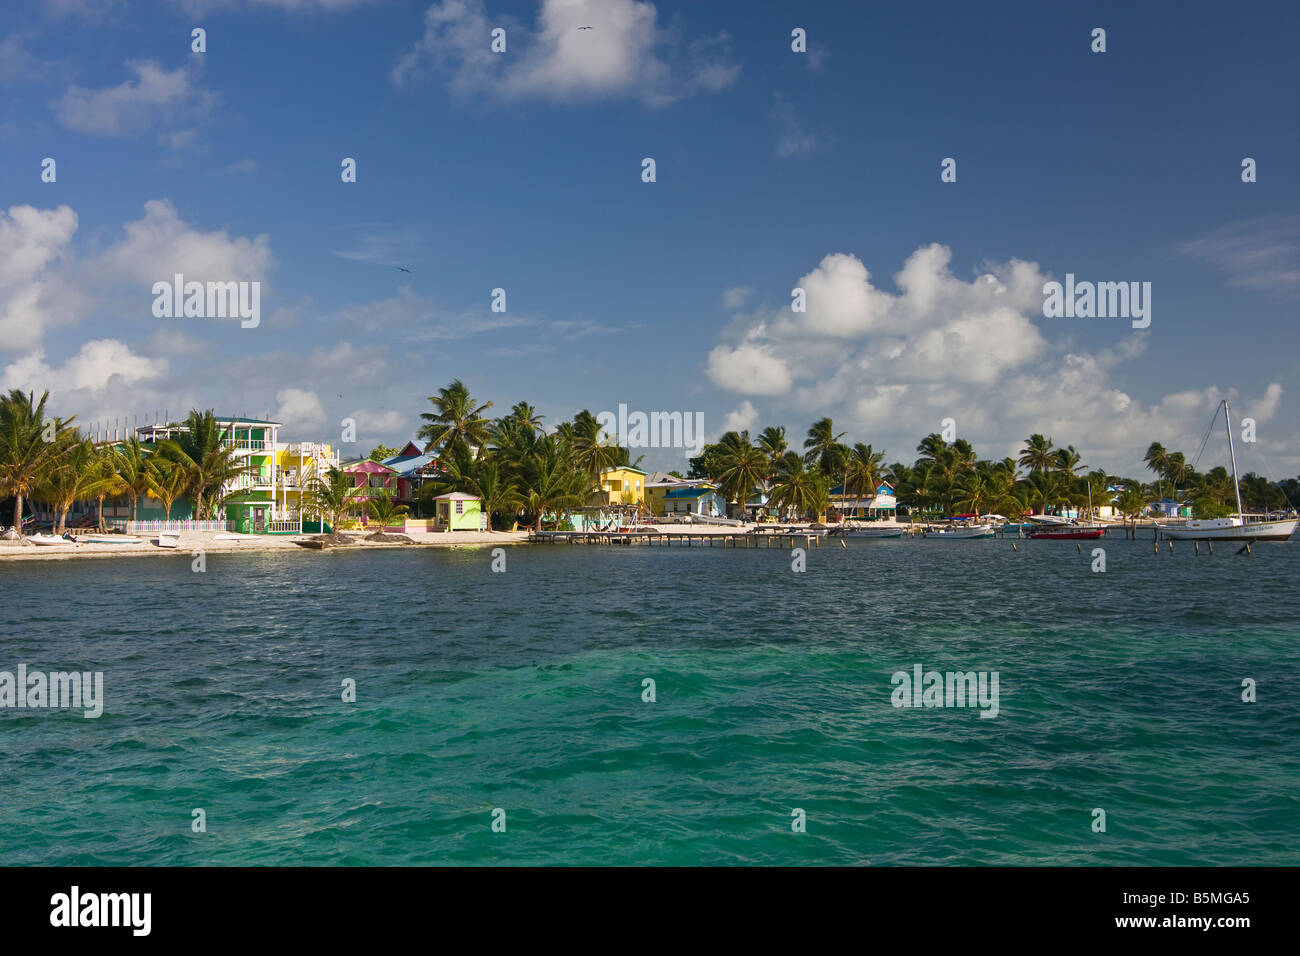 CAYE CAULKER, BELIZE - Waterfront showing hotels houses and palm trees Stock Photo